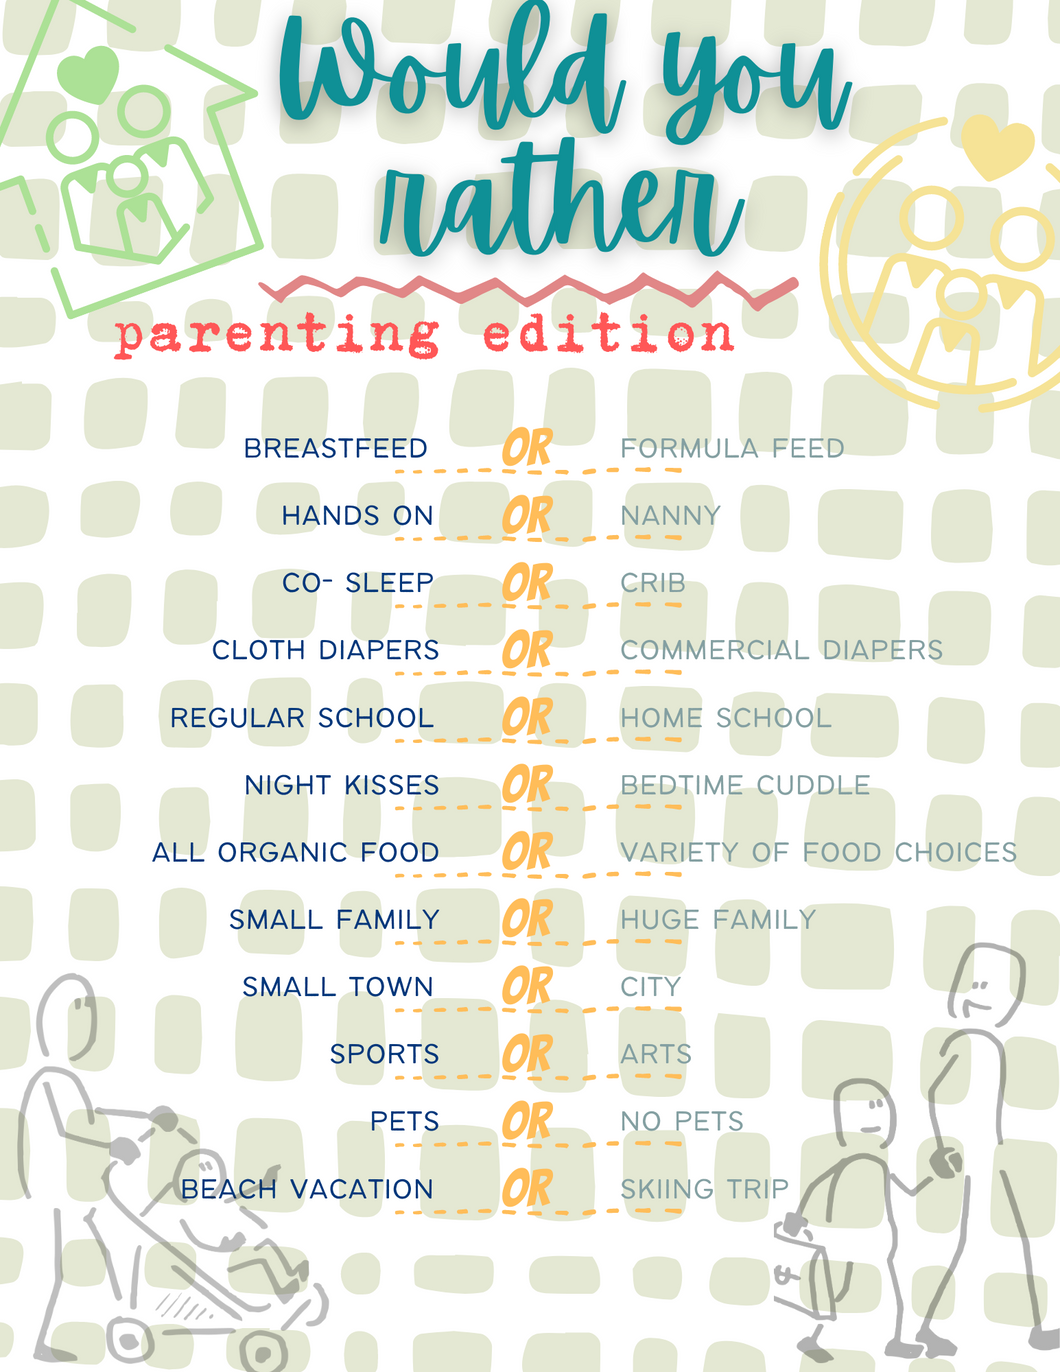 Would You Rather? Parenting Edition